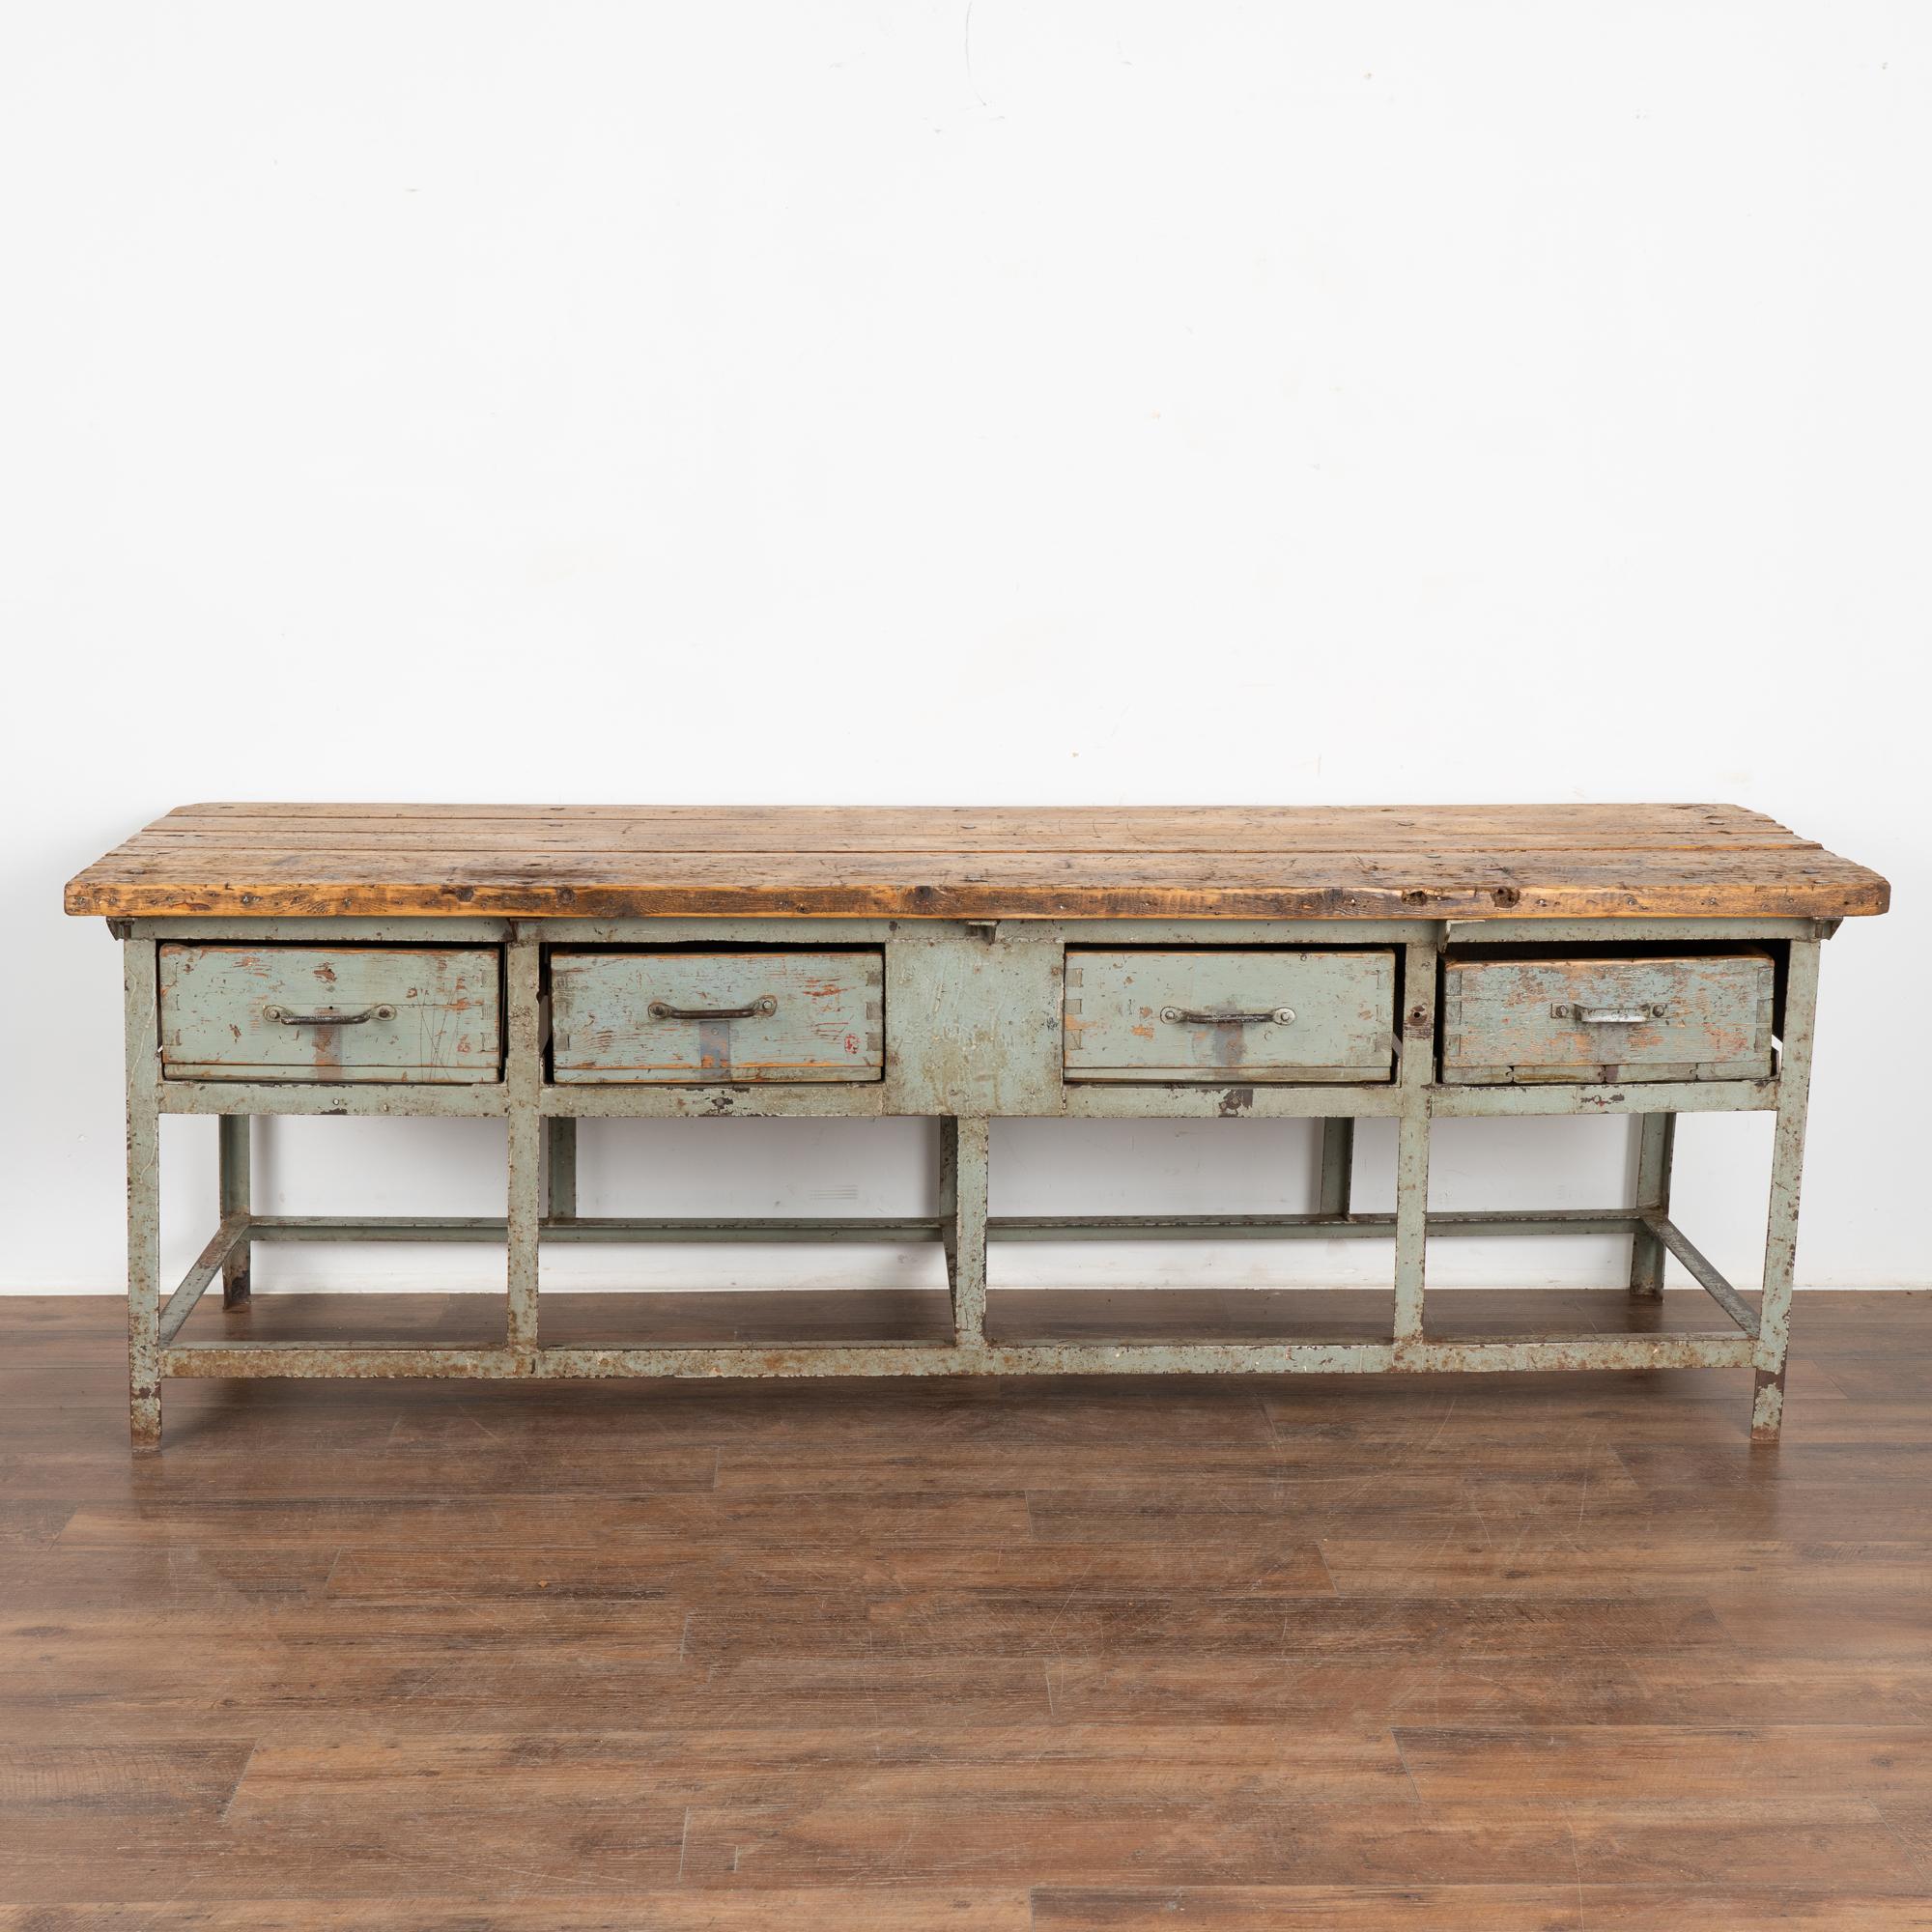 Rustic Long Industrial Work Table Kitchen Island with 4 Drawers, Hungary circa 1920-40